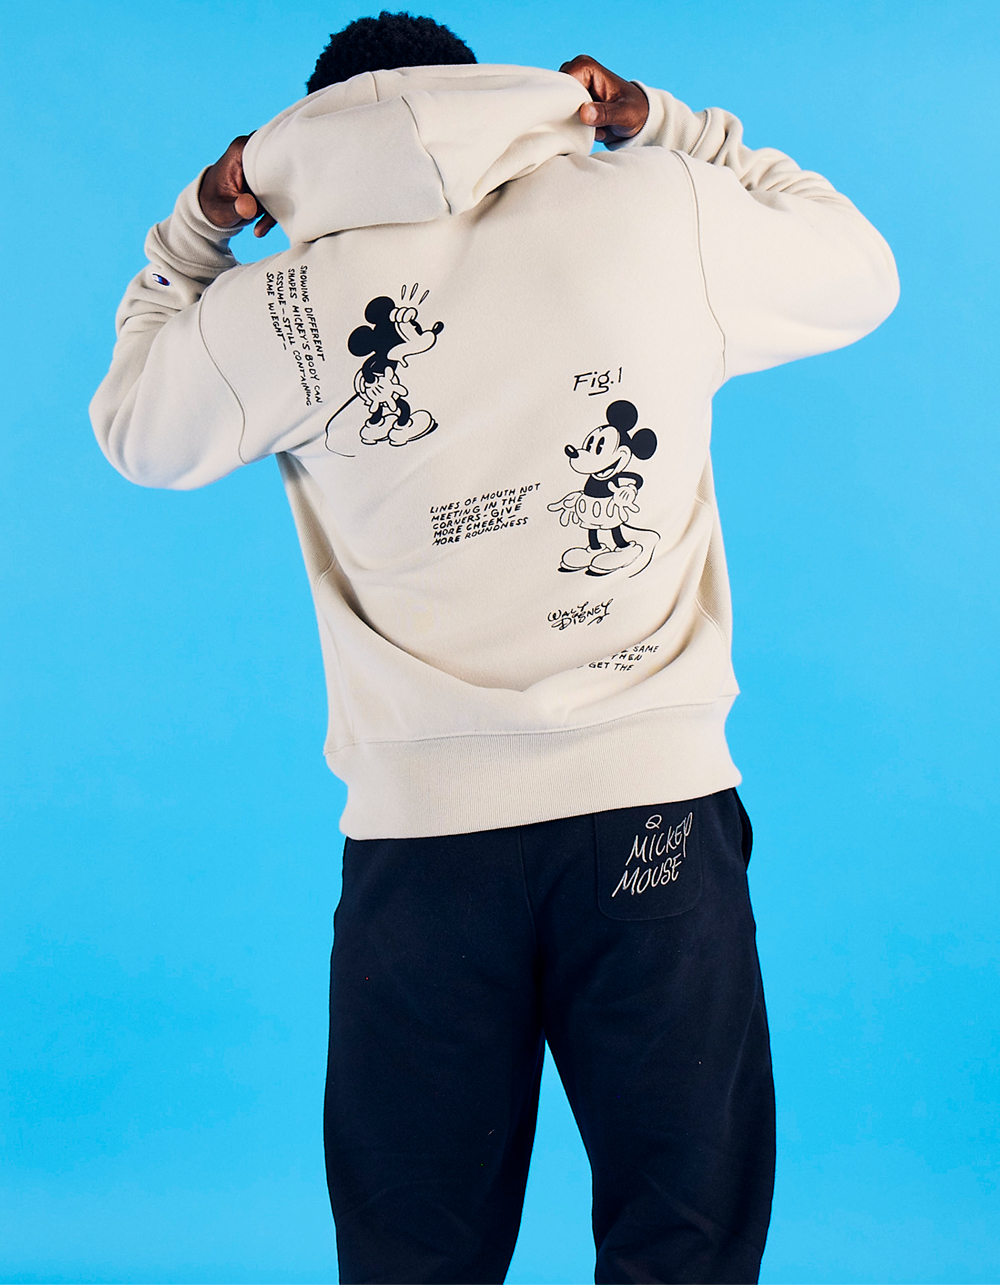 Get Buy Mickey Mouse X Champion Unisex Sweatshirt For Style Your Life